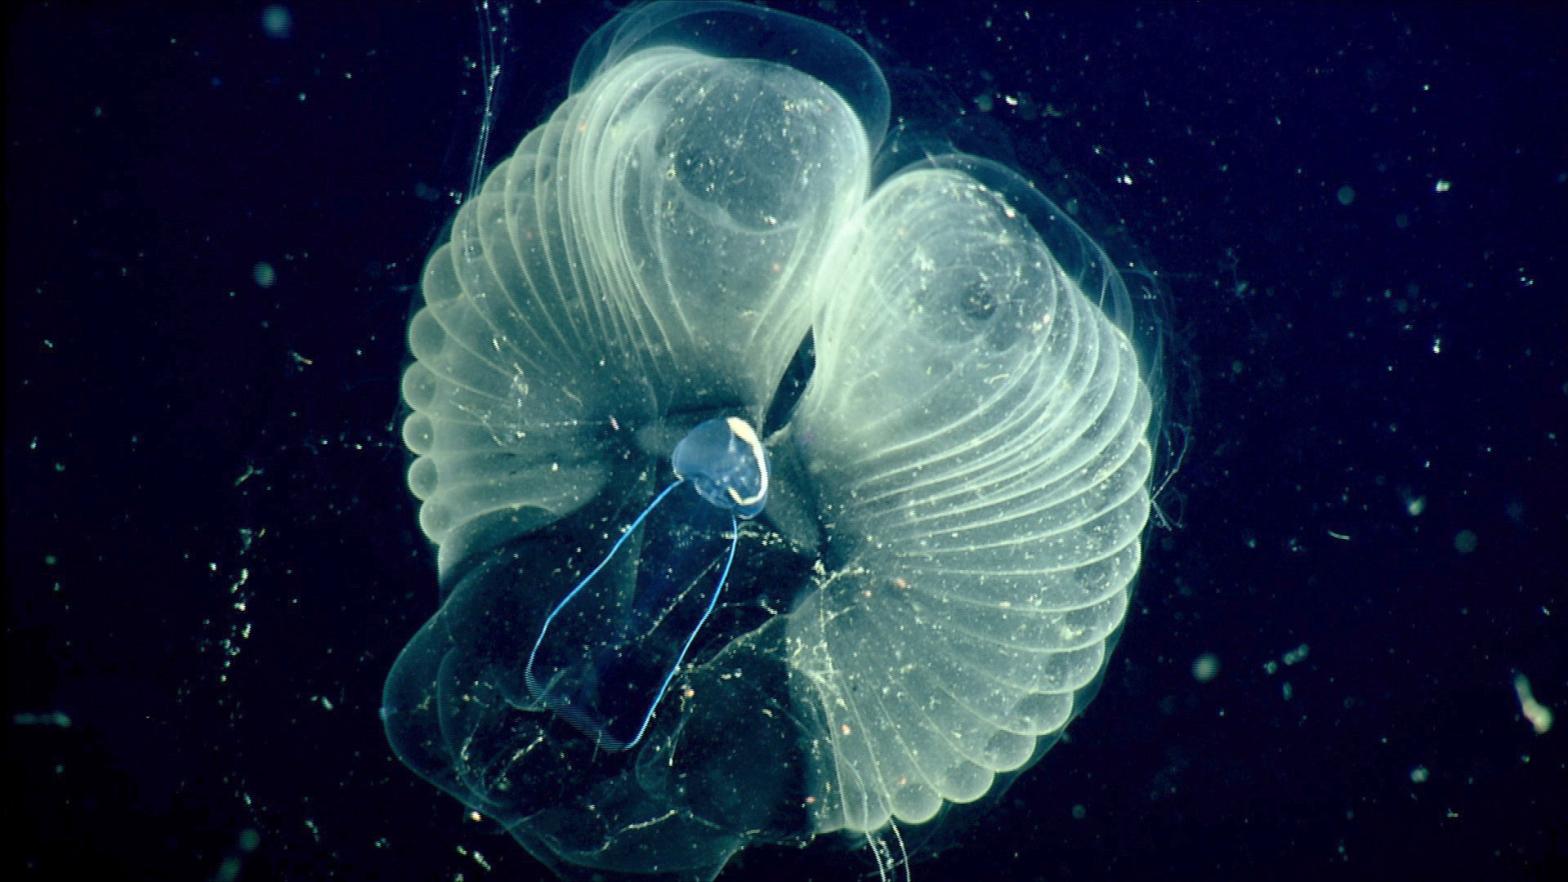 A close-up image of a giant larvacean in its, uh, snot palace. (Image: MBARI via AP)